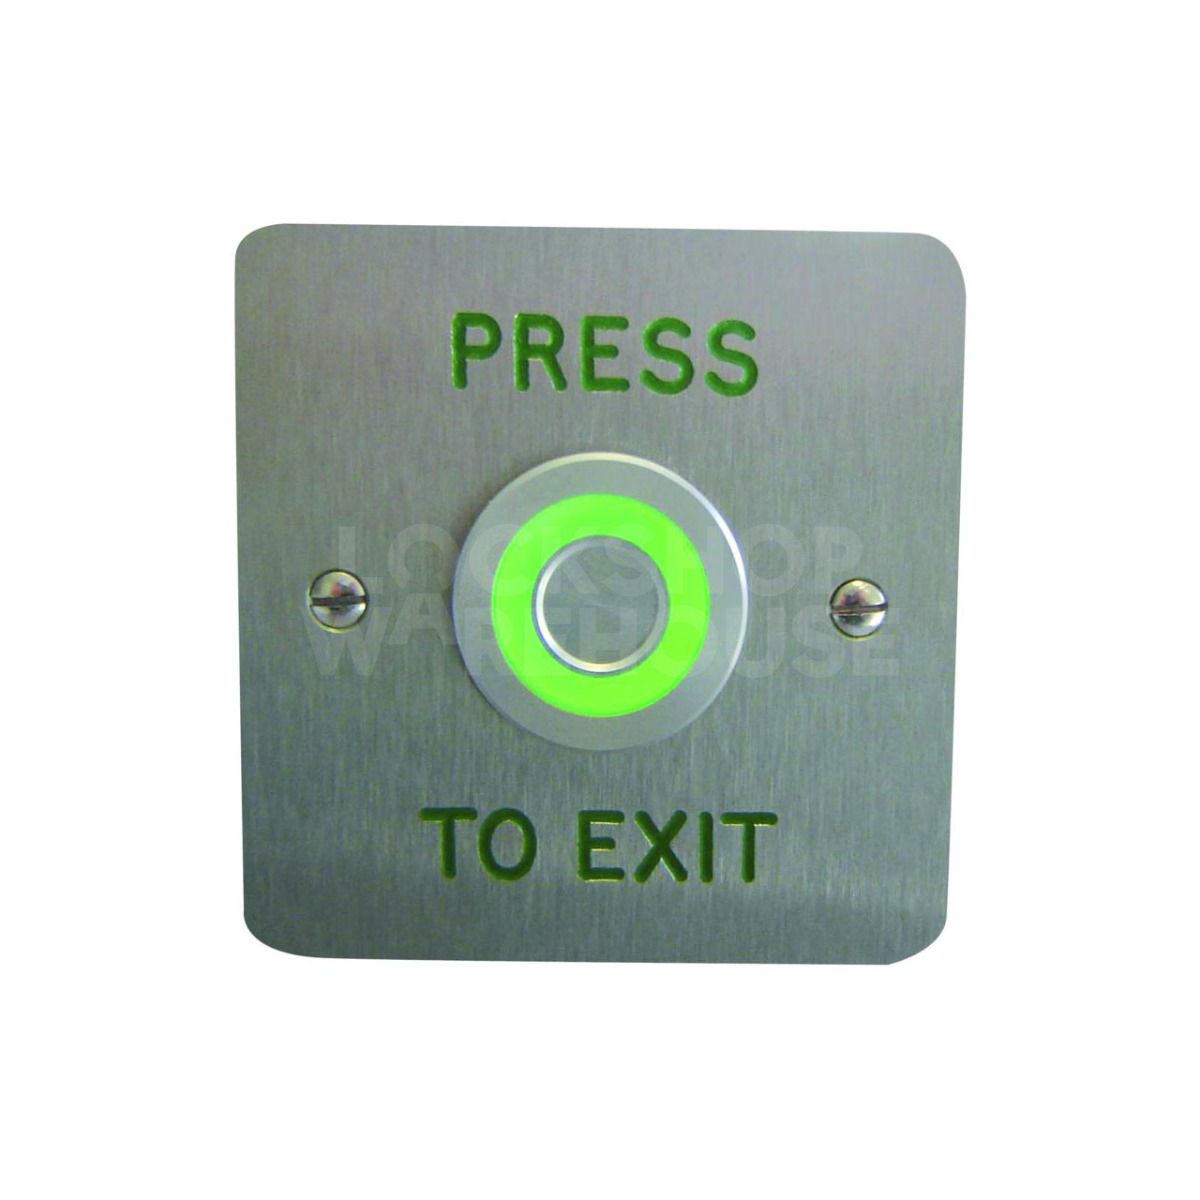 ASEC Halo Effect Press to exit button - Blue/Green